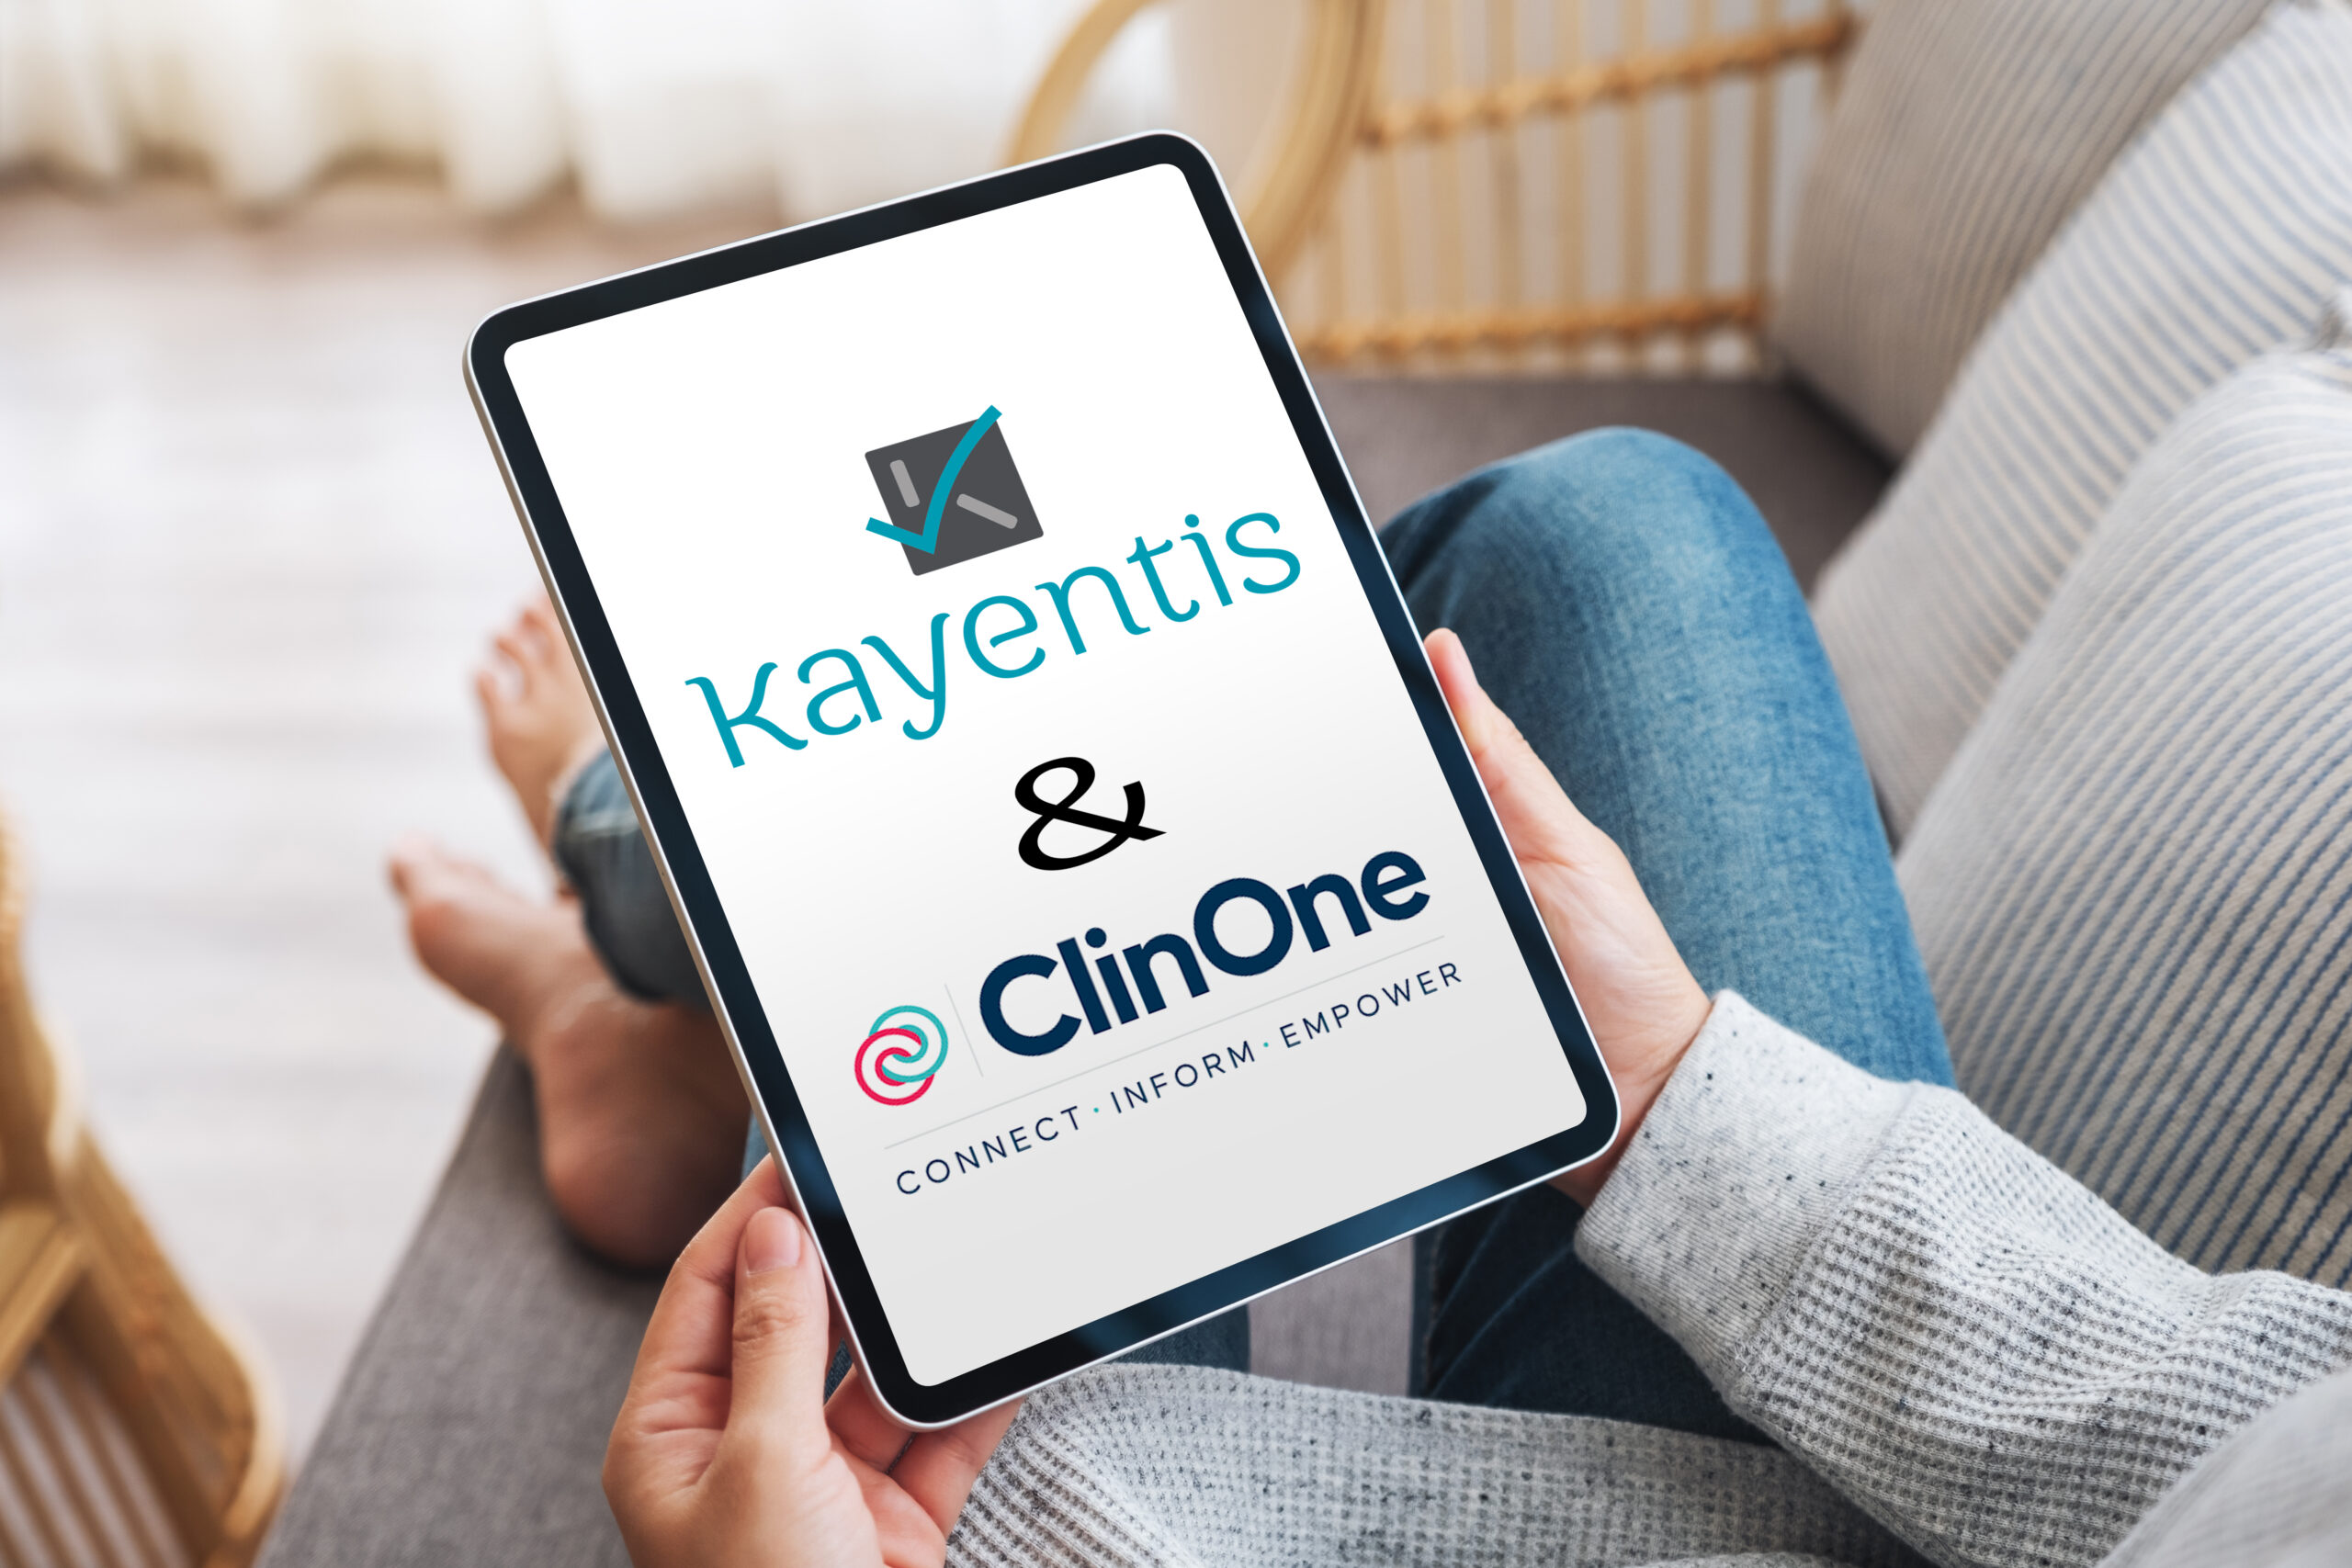 Kayentis and ClinOne join forces to improve efficiency and patient experience in clinical trials